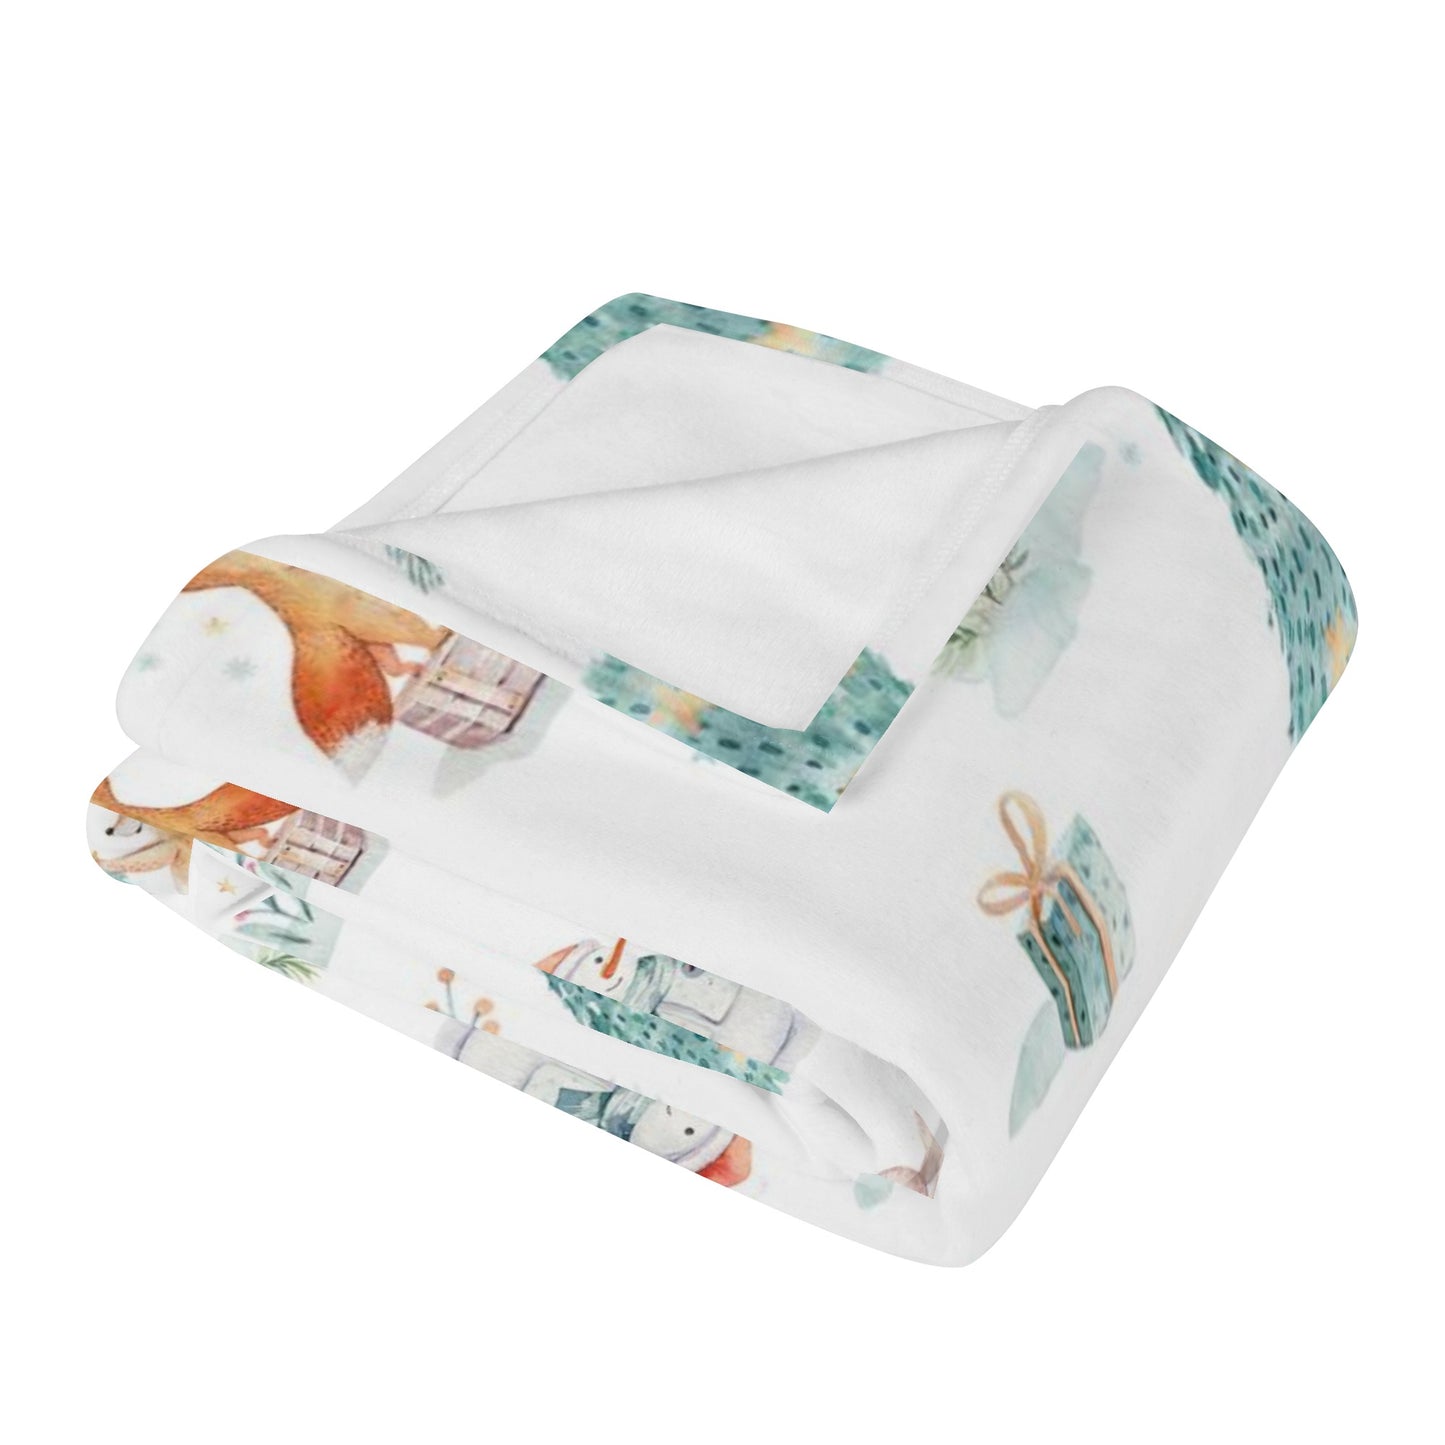 Its a Fox Day for Christmas Soft Flannel Breathable Blanket